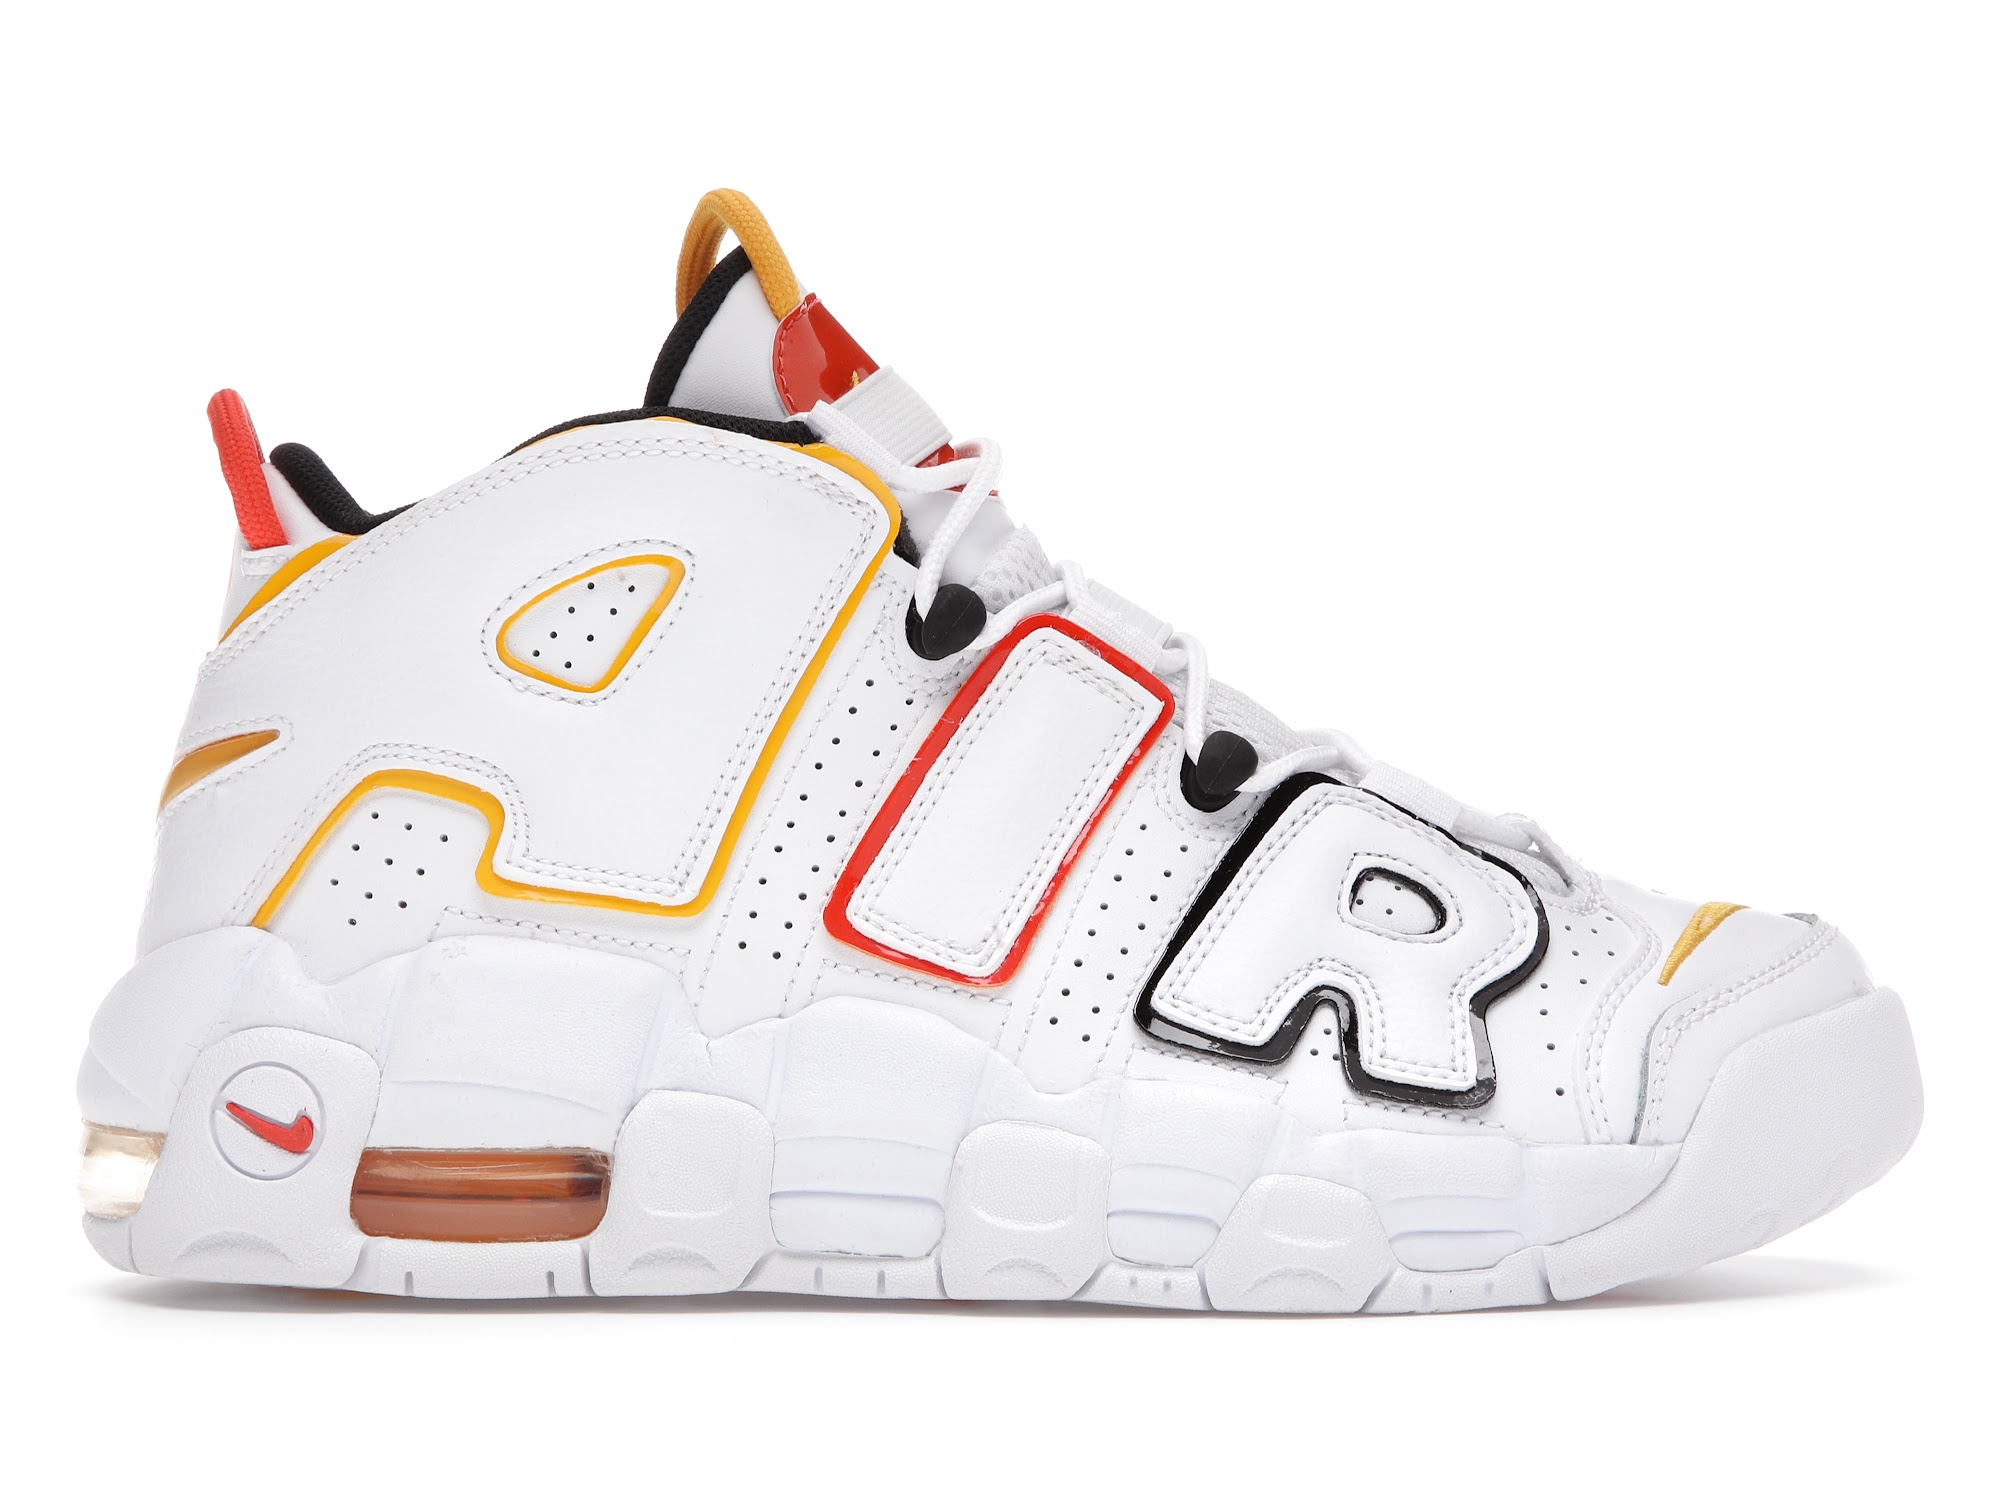 Nike Air More Uptempo Raygun (GS) キッズ - DD9282-100 - JP